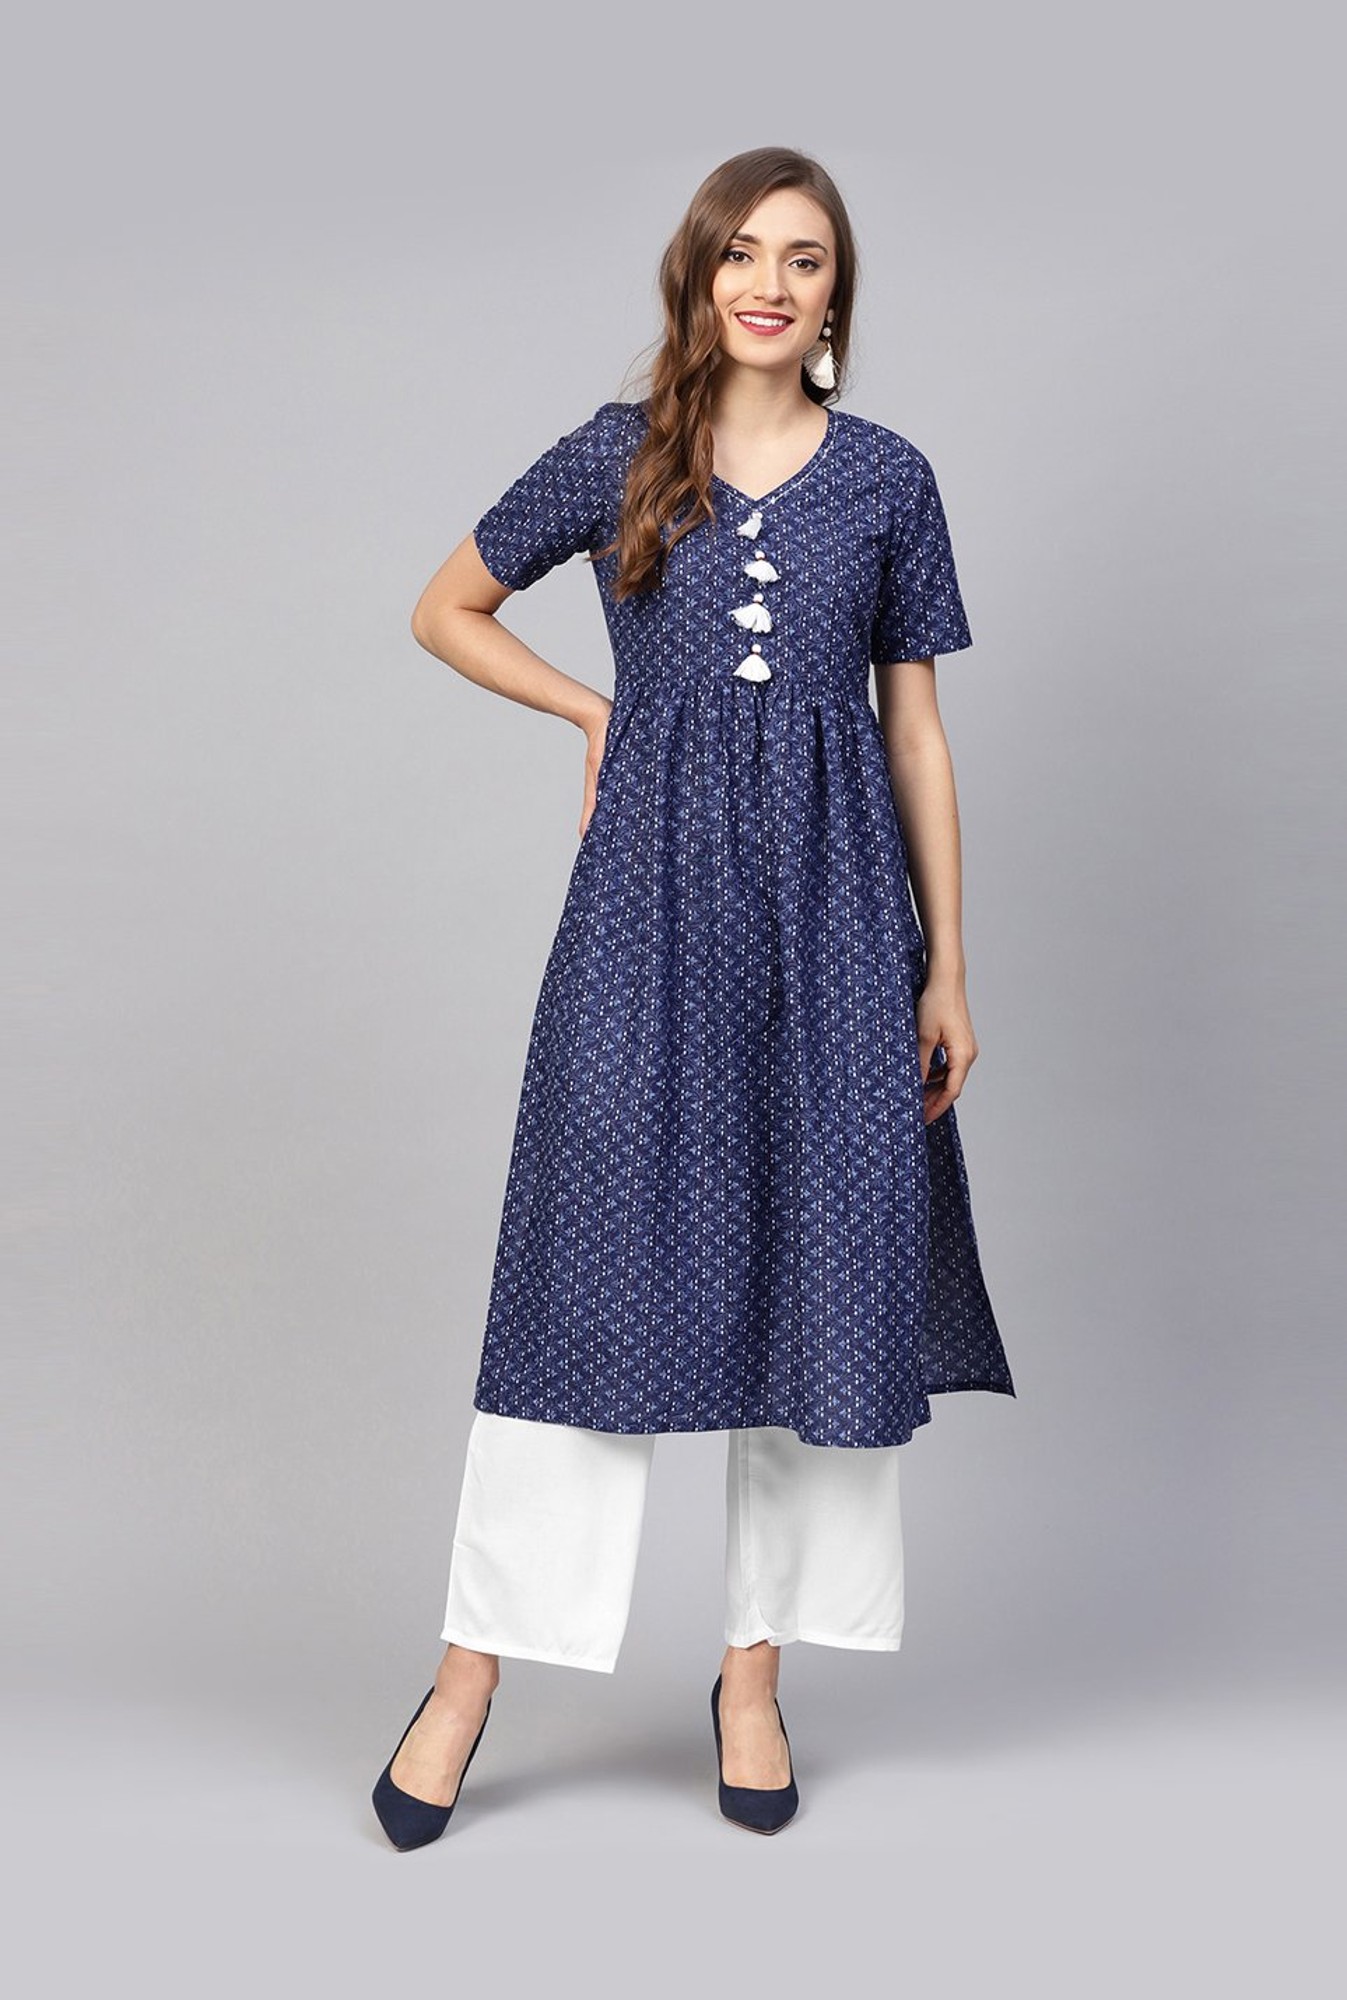 Stunning White Color Party Wear Embroidered Kurti